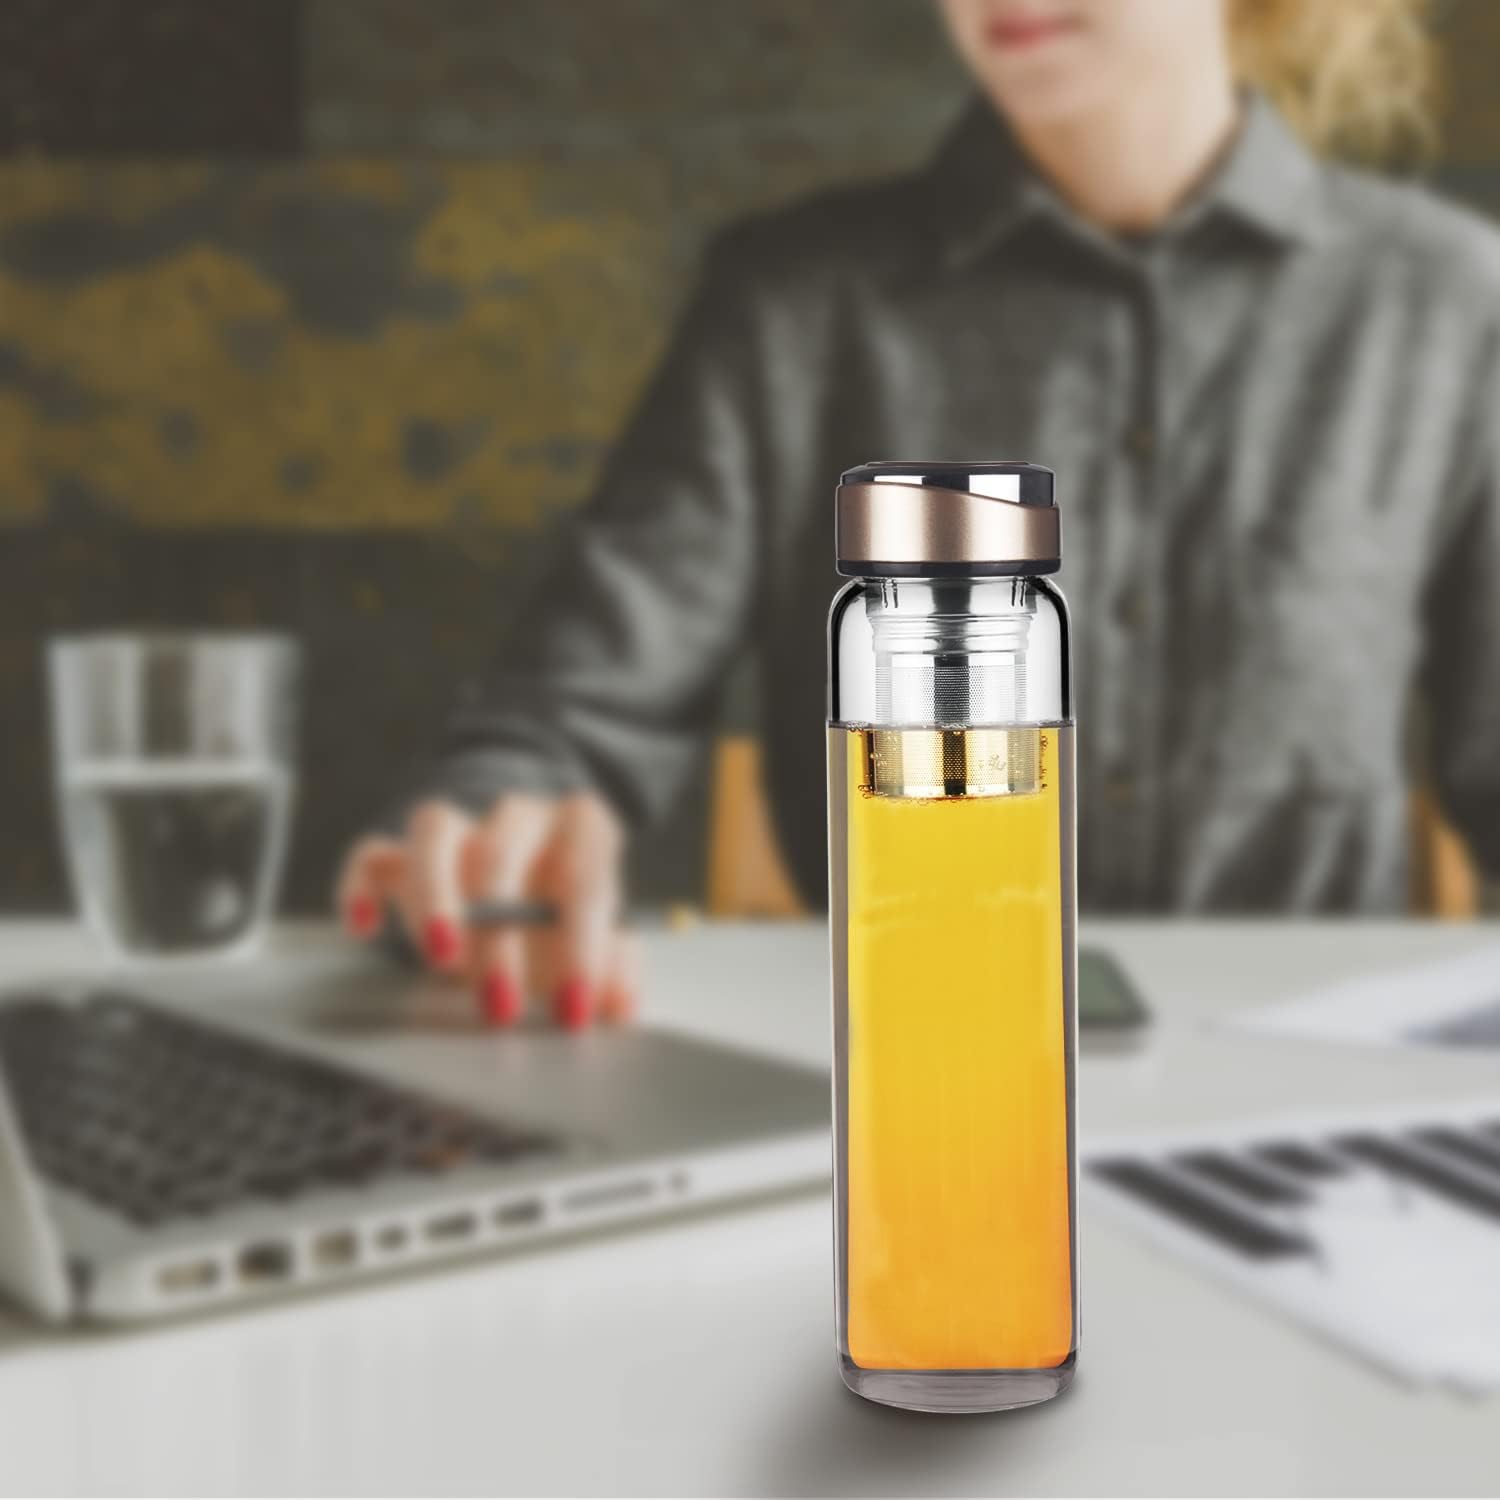 DEARRAY Glass Tea Bottle for Travelling with Stainless Steel Strainer 600 ml / 1000 ml / 1 Litre, Teapot with Filter to Go, Borosilicate Glass Water Bottle with Neoprene Cover and Stylish Stainless Steel Lid